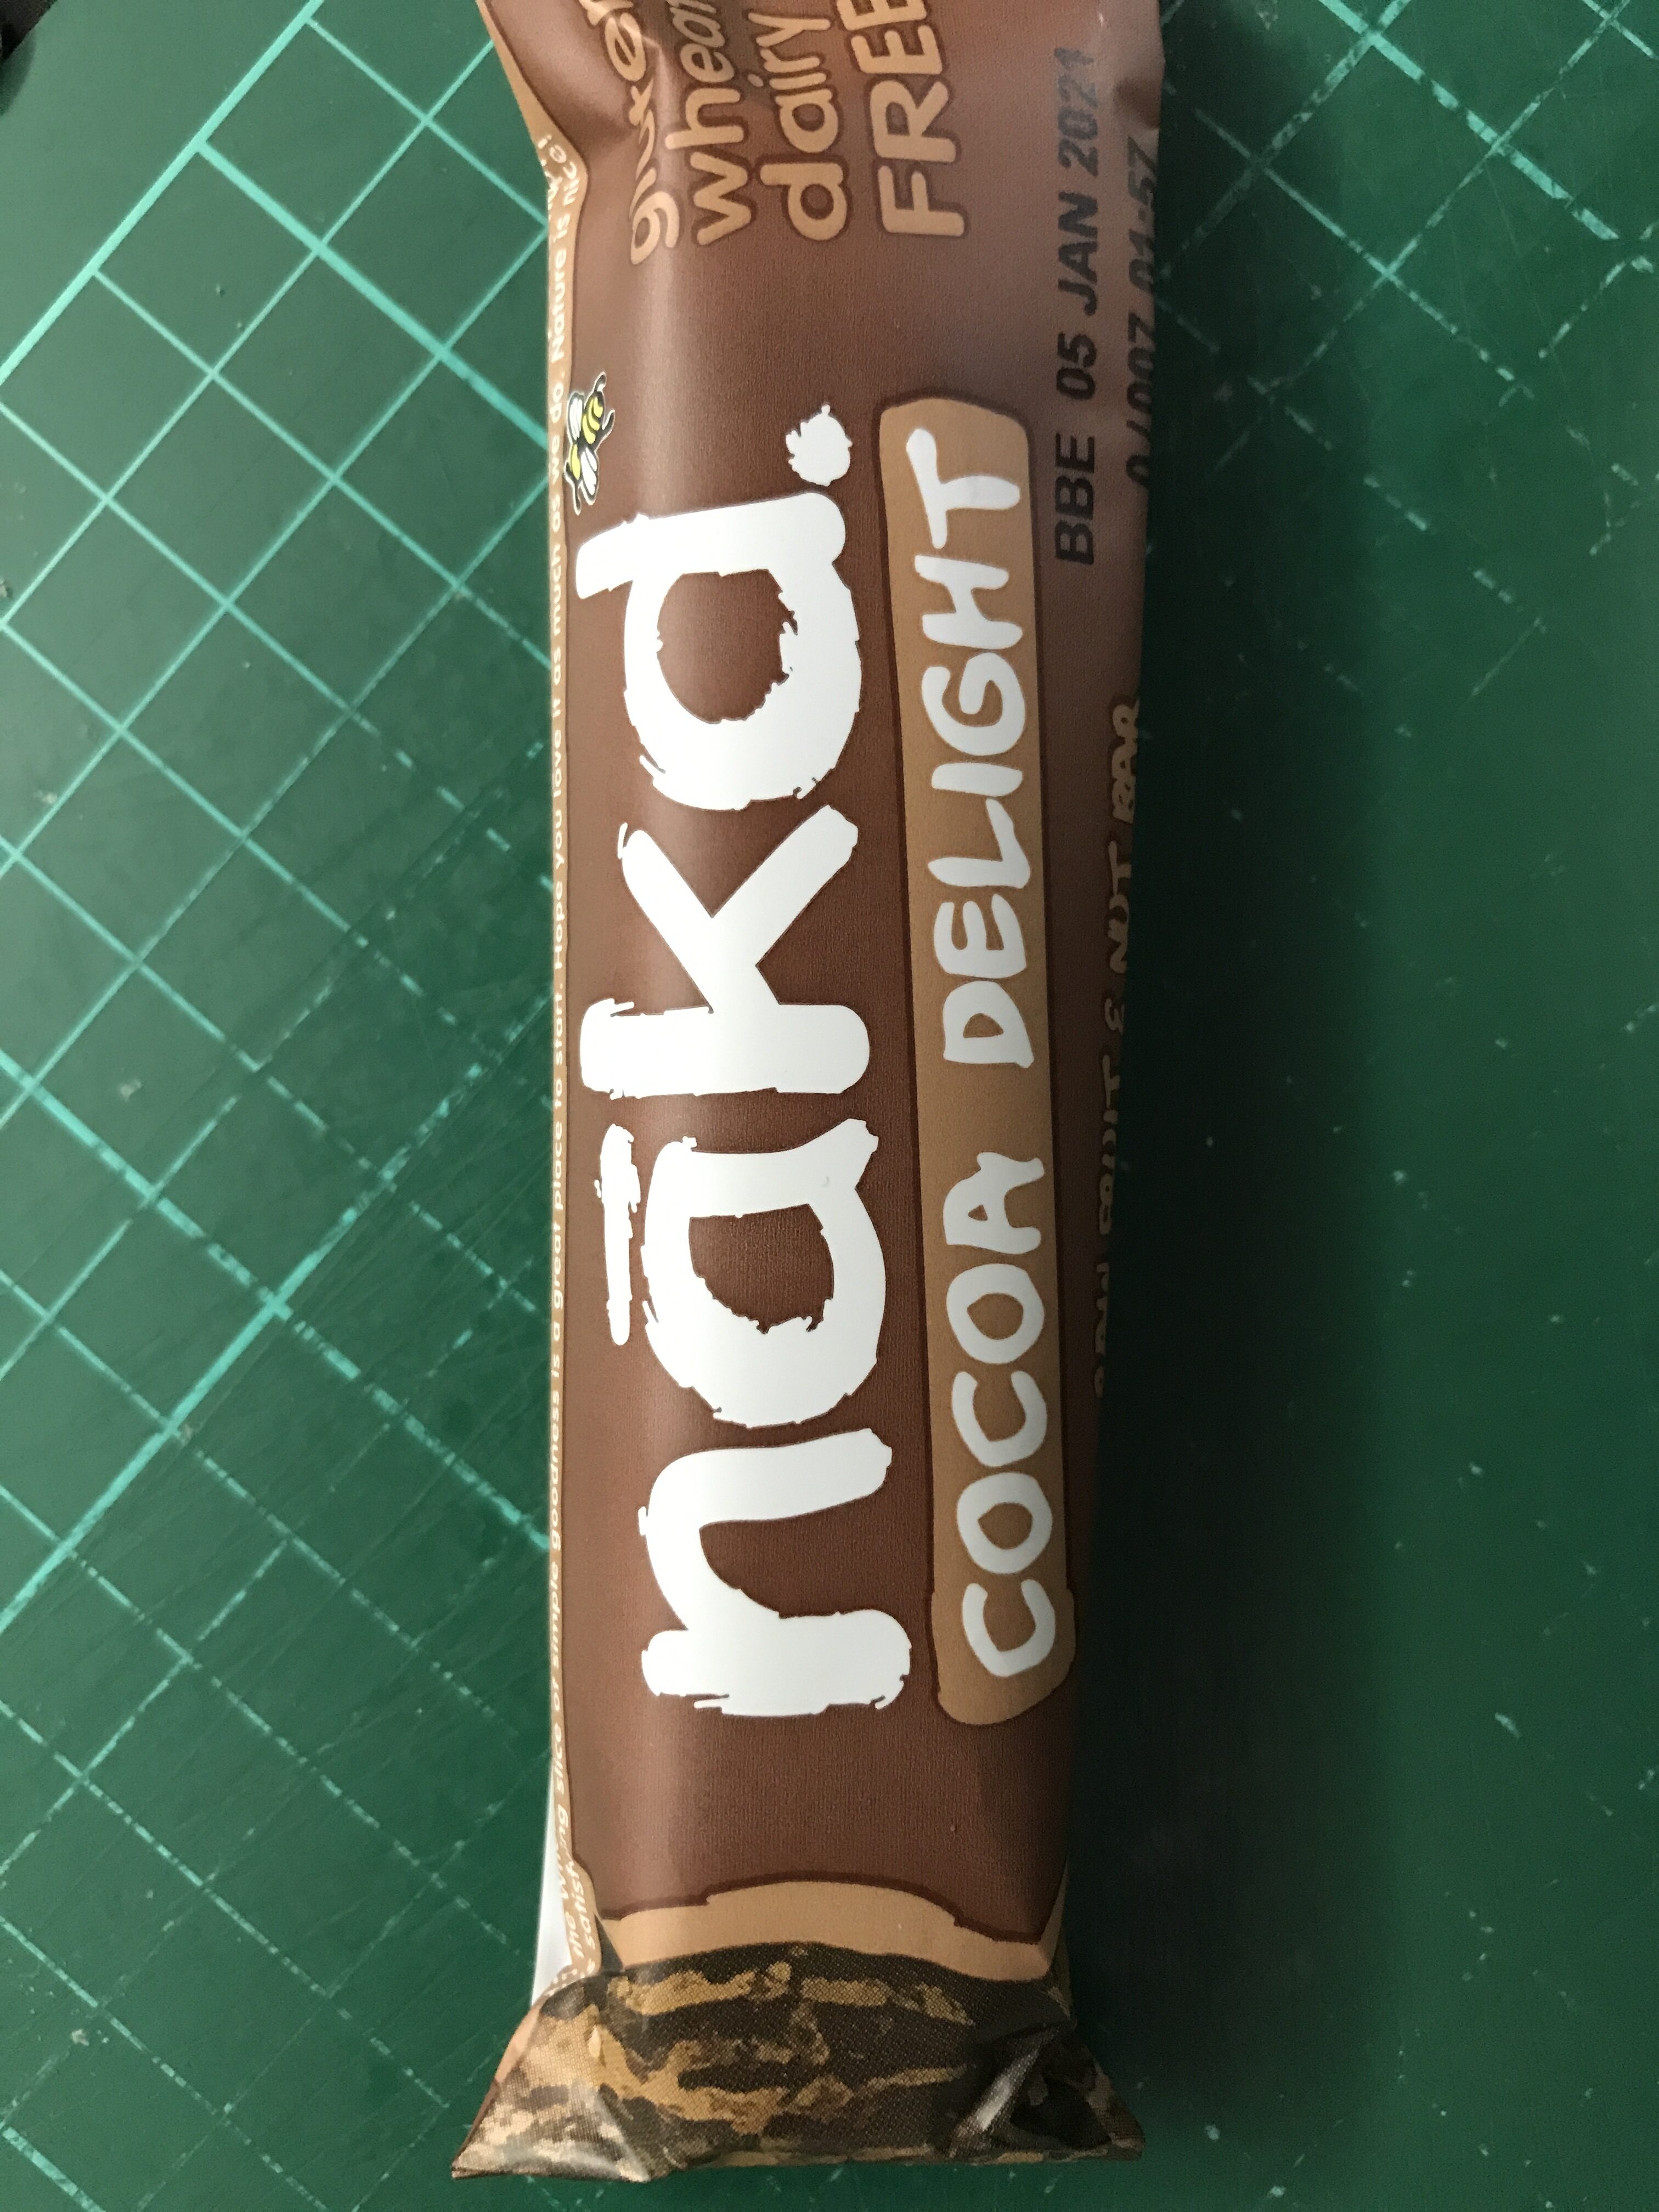 Nakd Cacao - Nutrition facts - fr